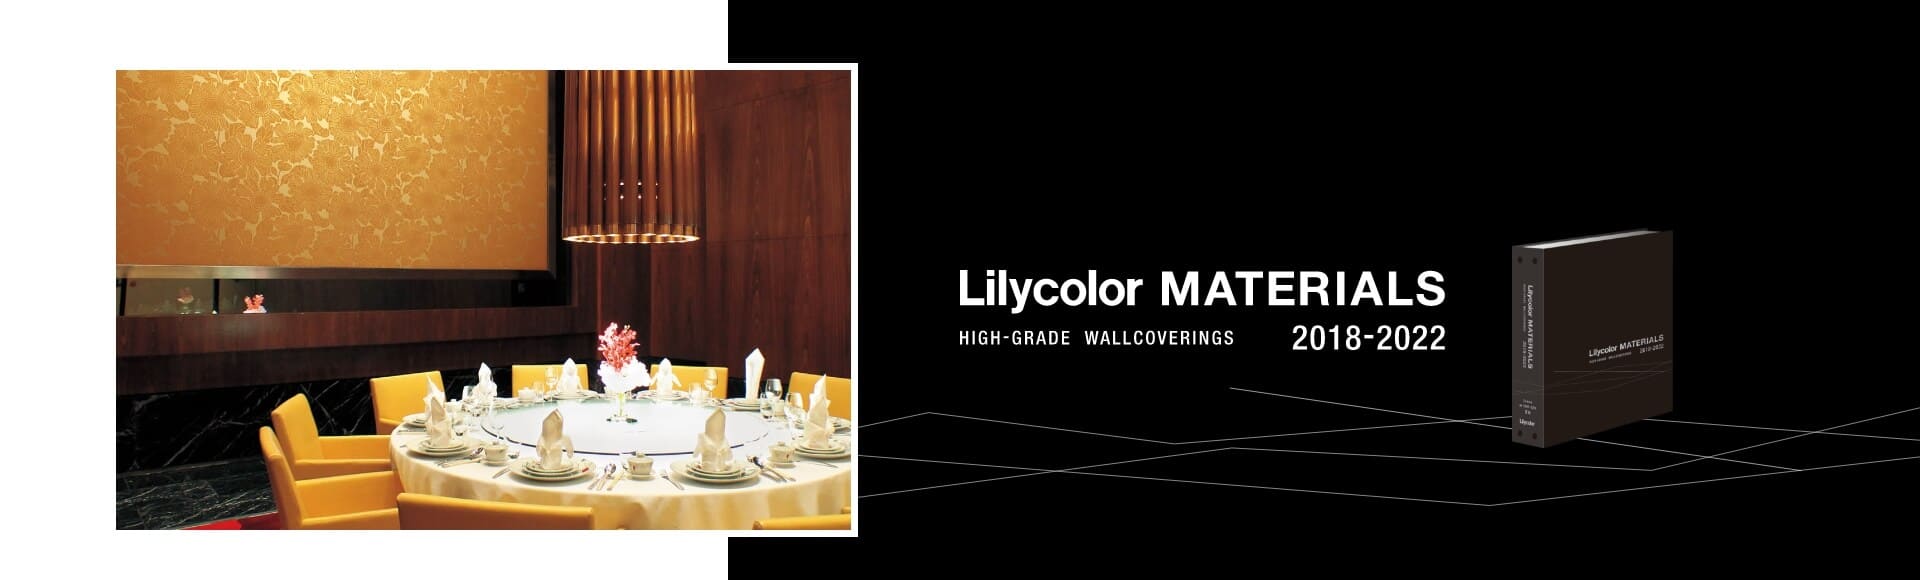 Lilycolor MATERIALS HIGH-GRADE WALLCOVERINGS 2018-2022